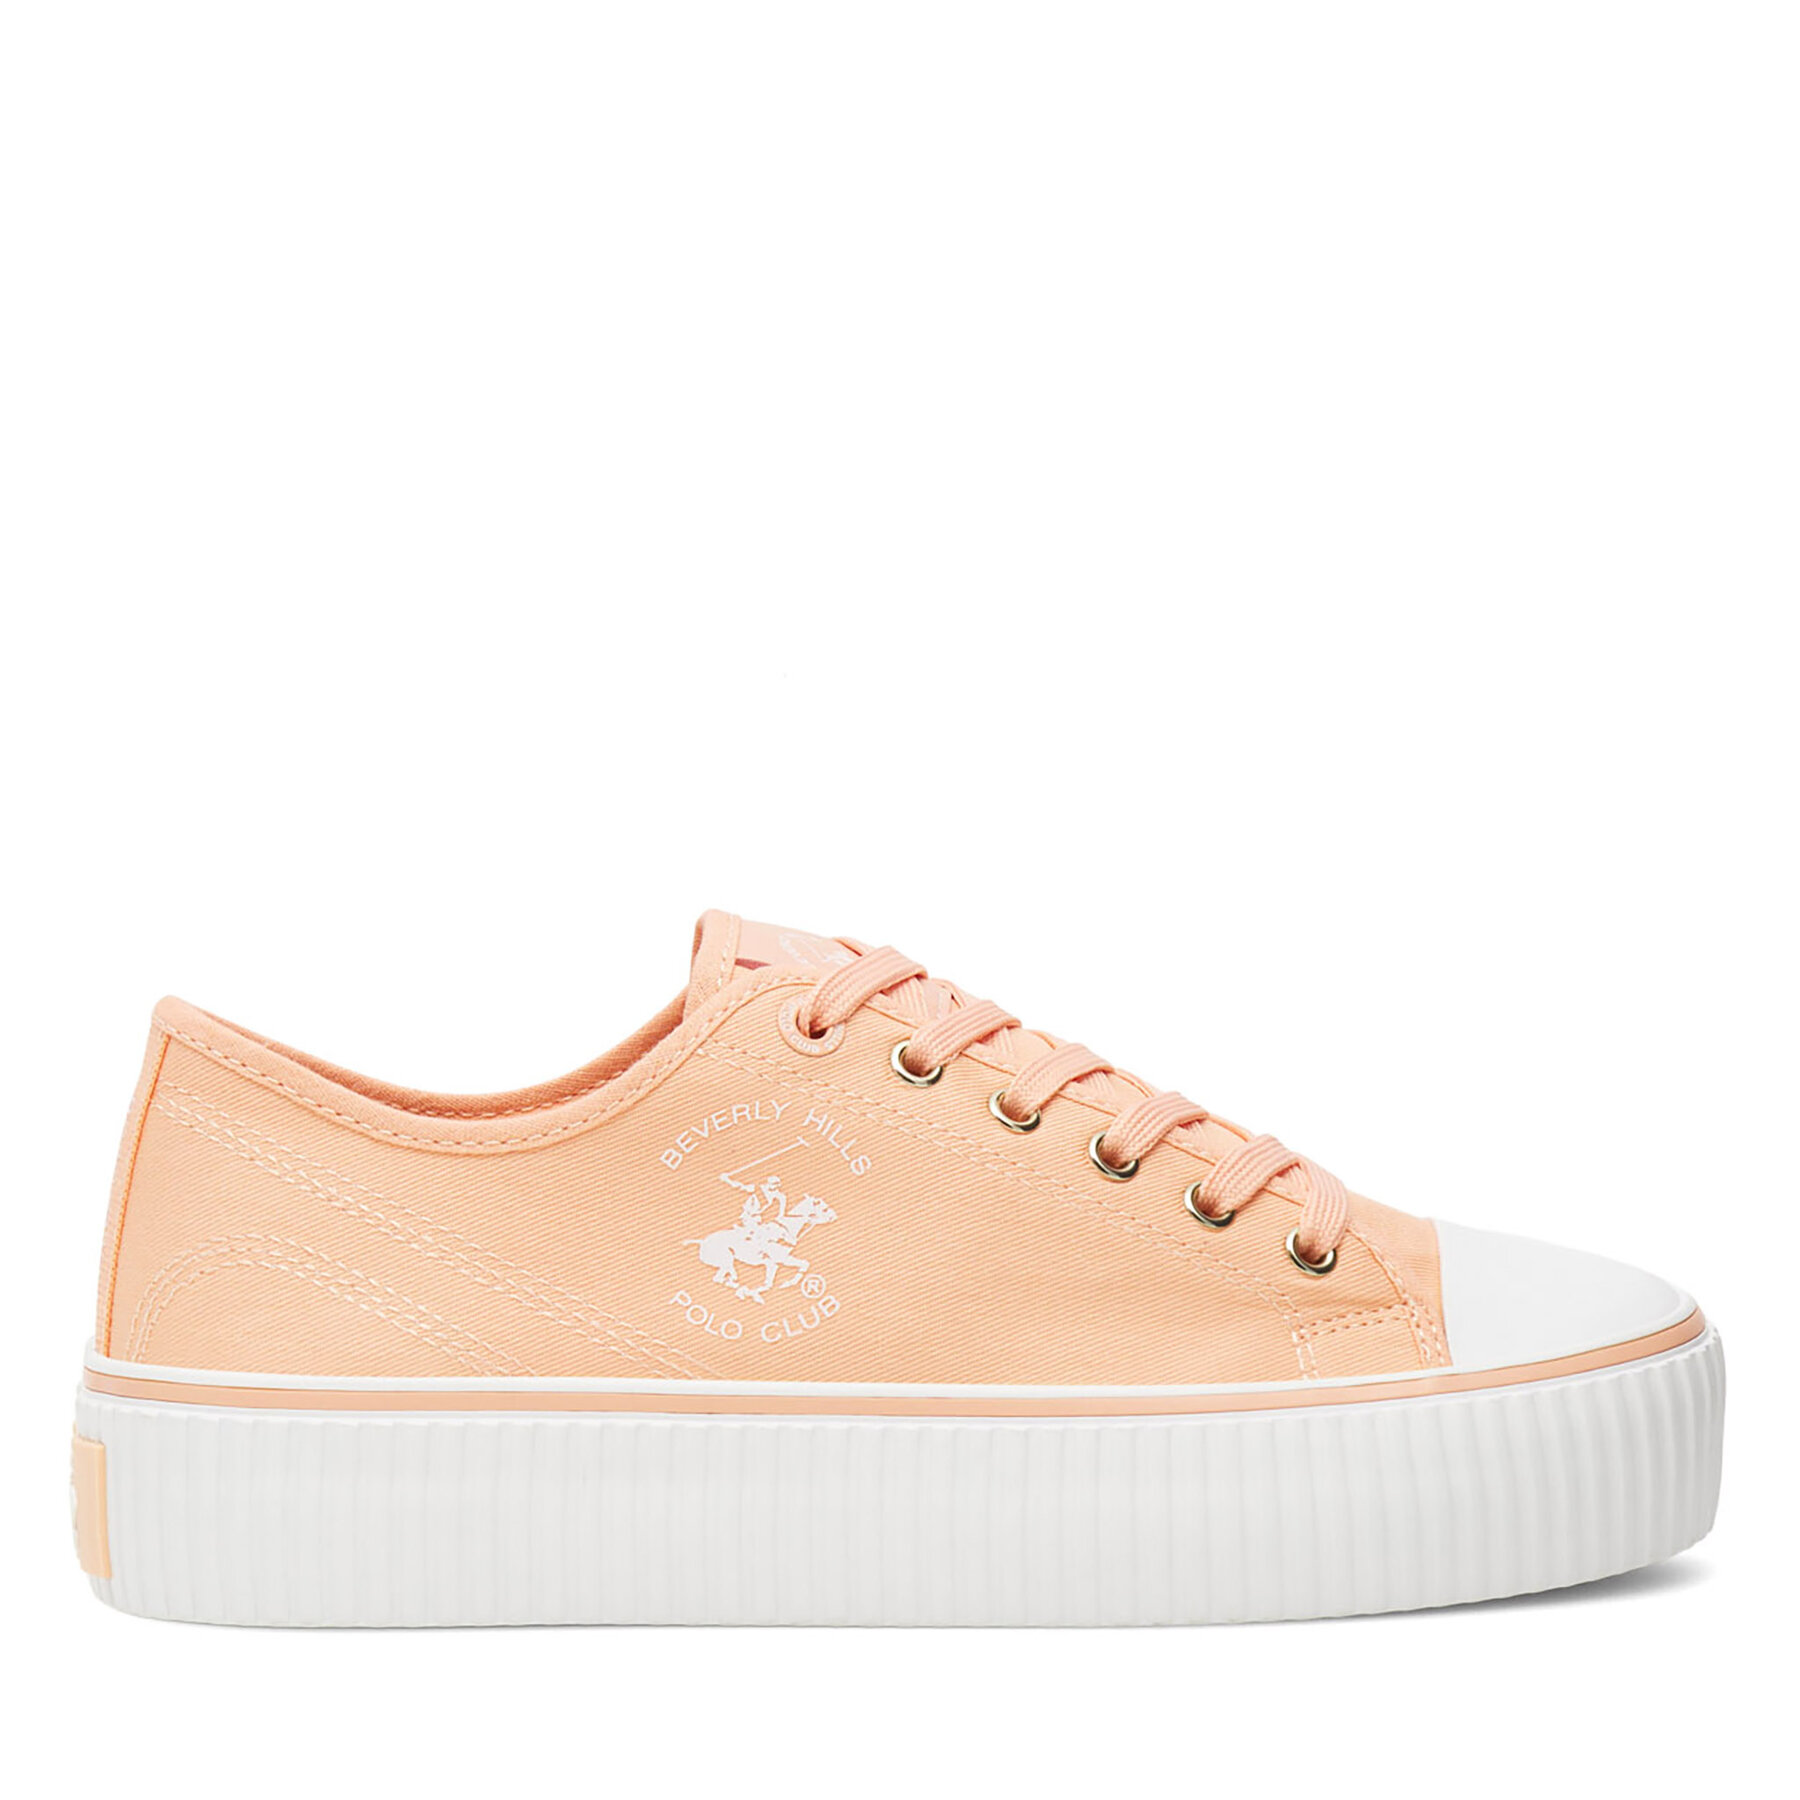 Sneakers aus Stoff Beverly Hills Polo Club W-BHPC027M Orange von Beverly Hills Polo Club